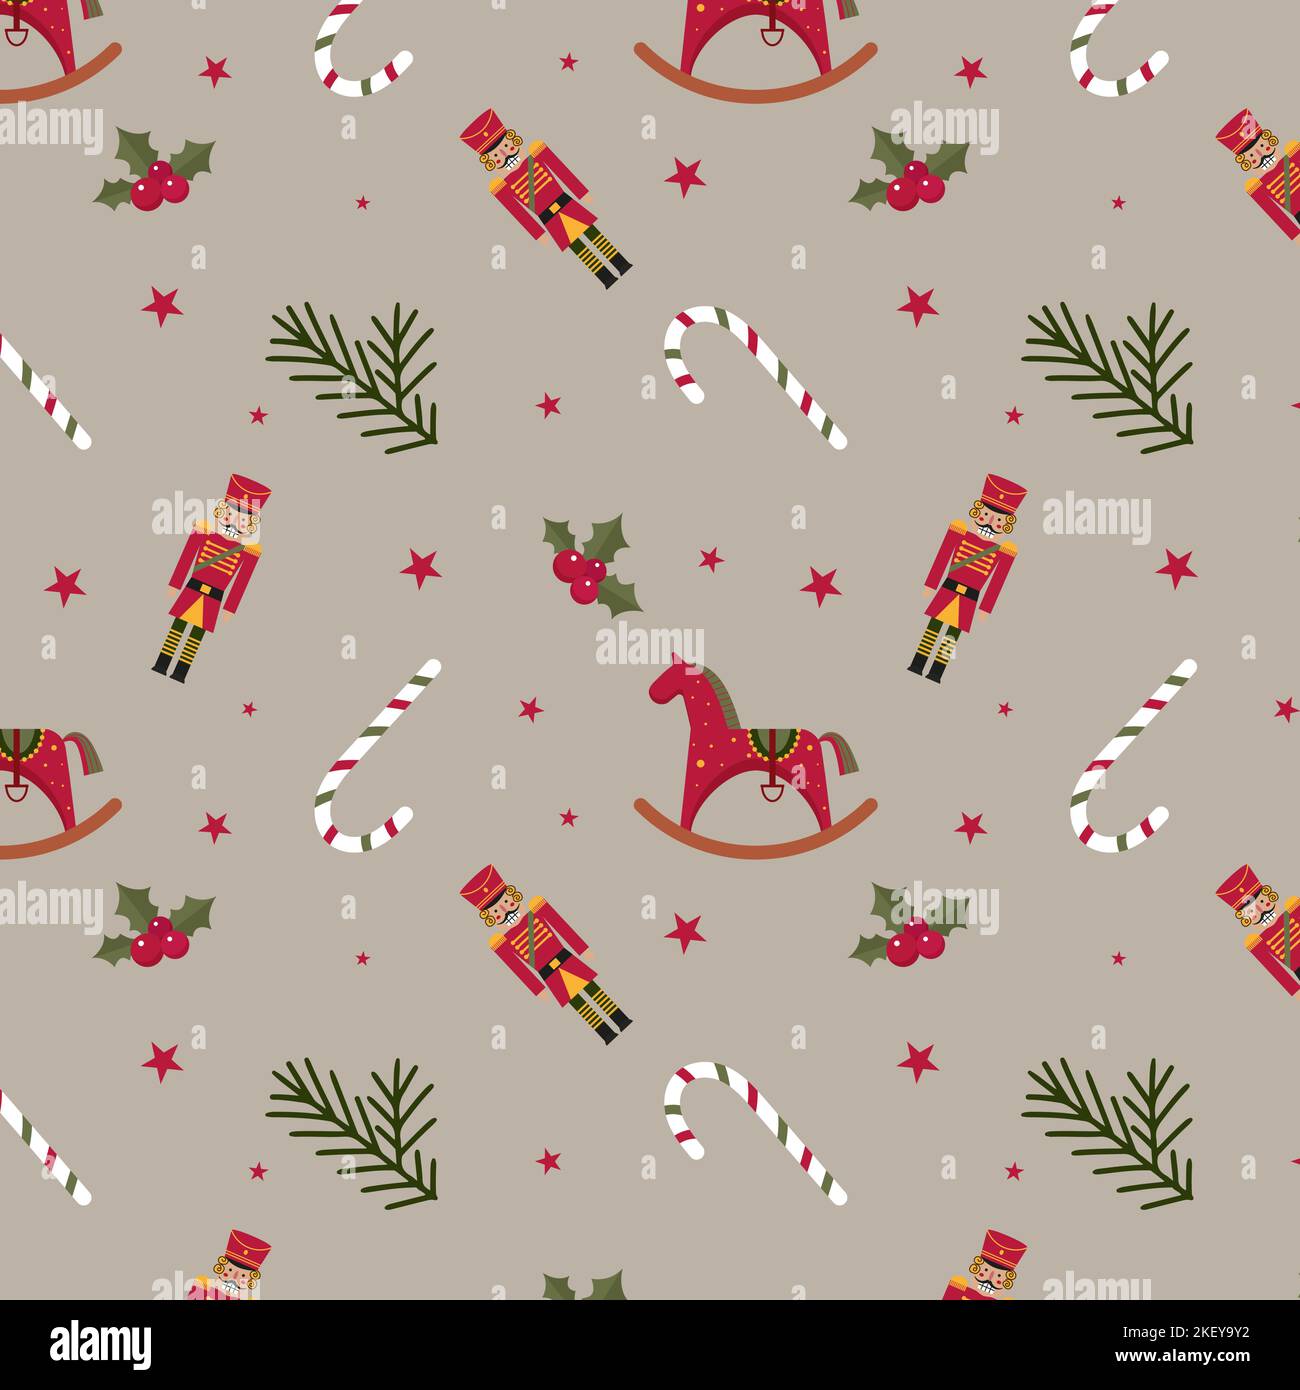 Christmas pattern with toy horse candy canes soldier nutcracker spruce branches christmas berry and stars Stock Vector